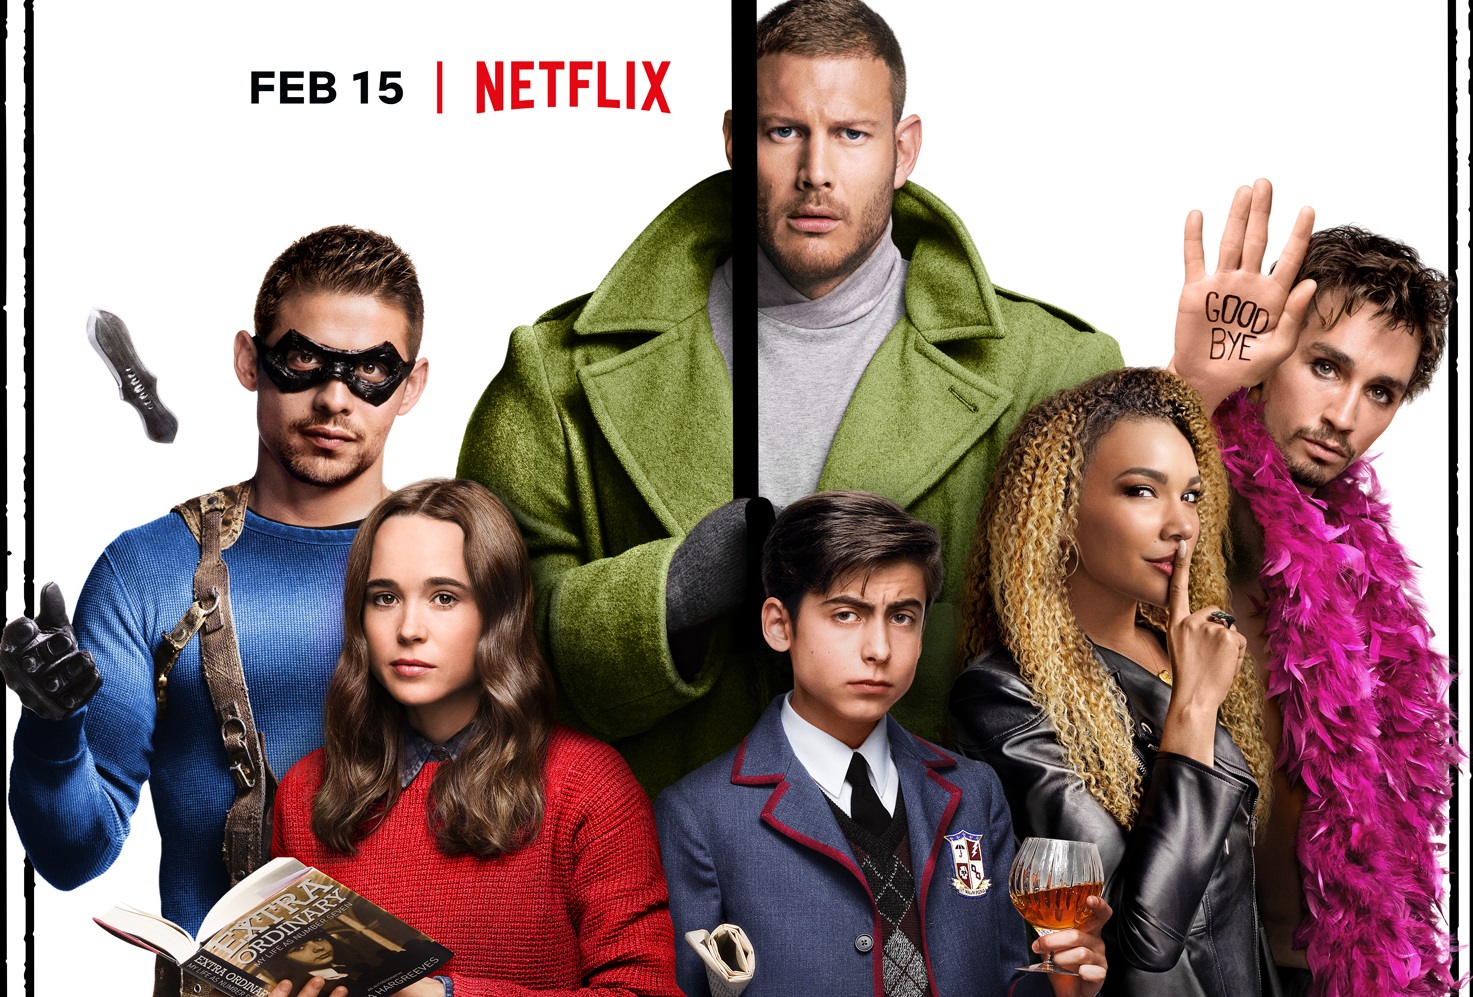 Netflix's The Umbrella Academy has been fully mapped out, reveals Gerard Way1473 x 997